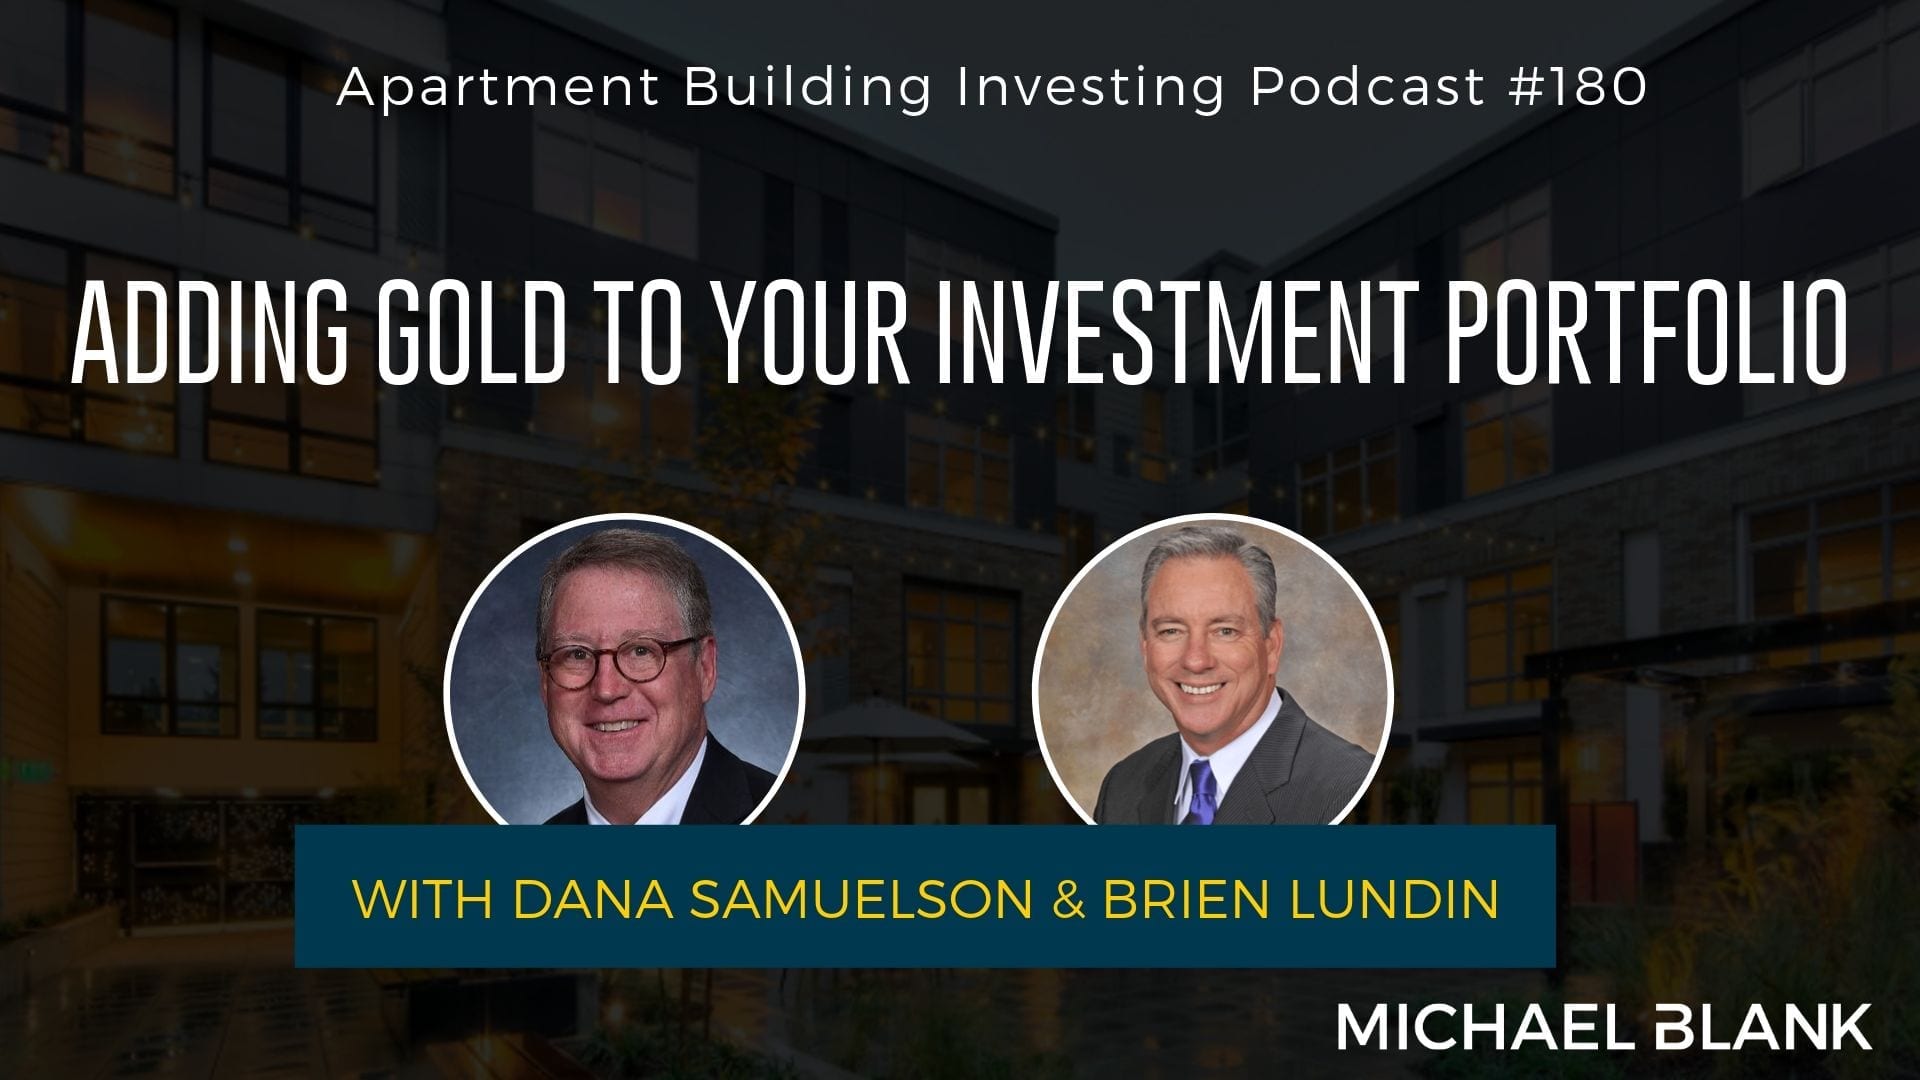 MB 180: Adding Gold to Your Investment Portfolio – With Dana Samuelson & Brien Lundin